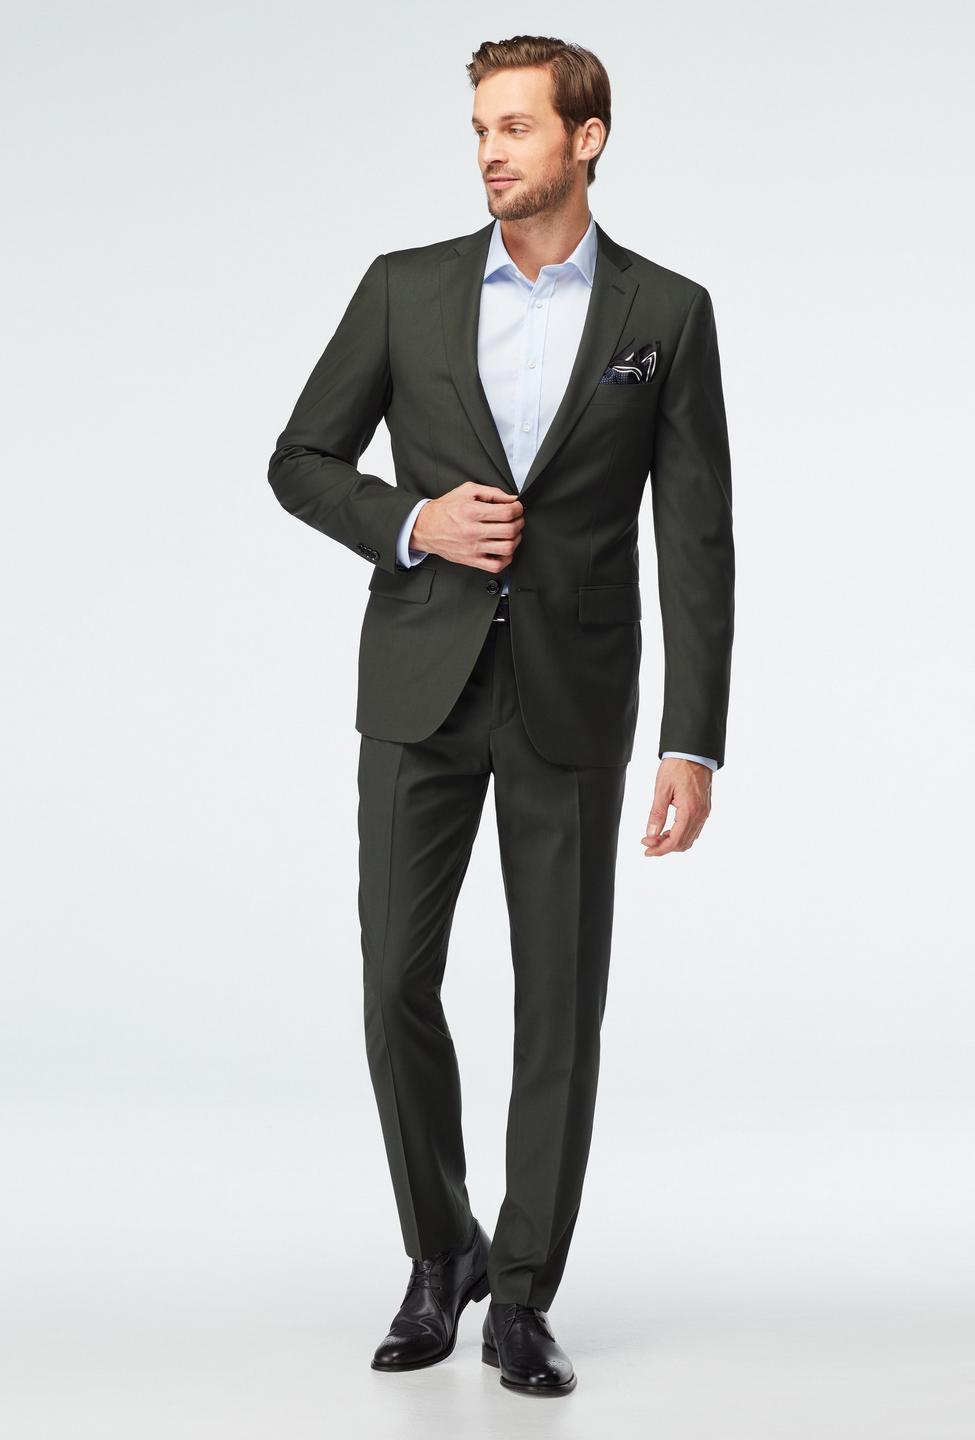 Green suit - Milano Solid Design from Indochino Collection